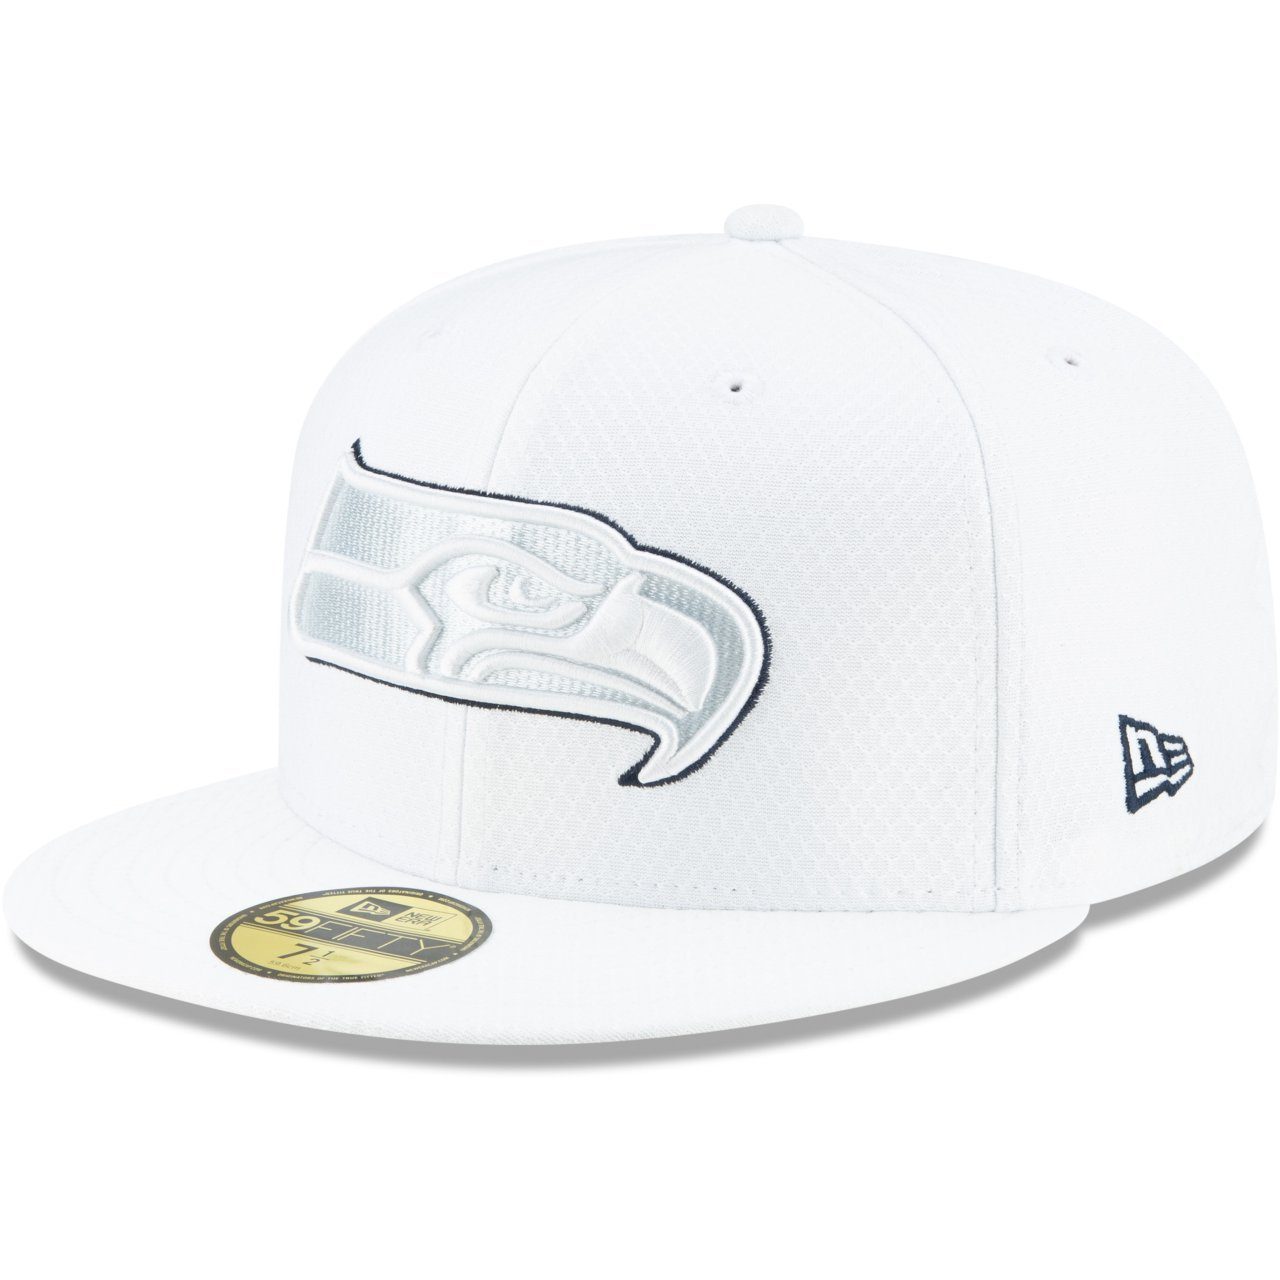 New Era Fitted Cap 59Fifty PLATINUM NFL Sideline Seattle Seahawks | Fitted Caps